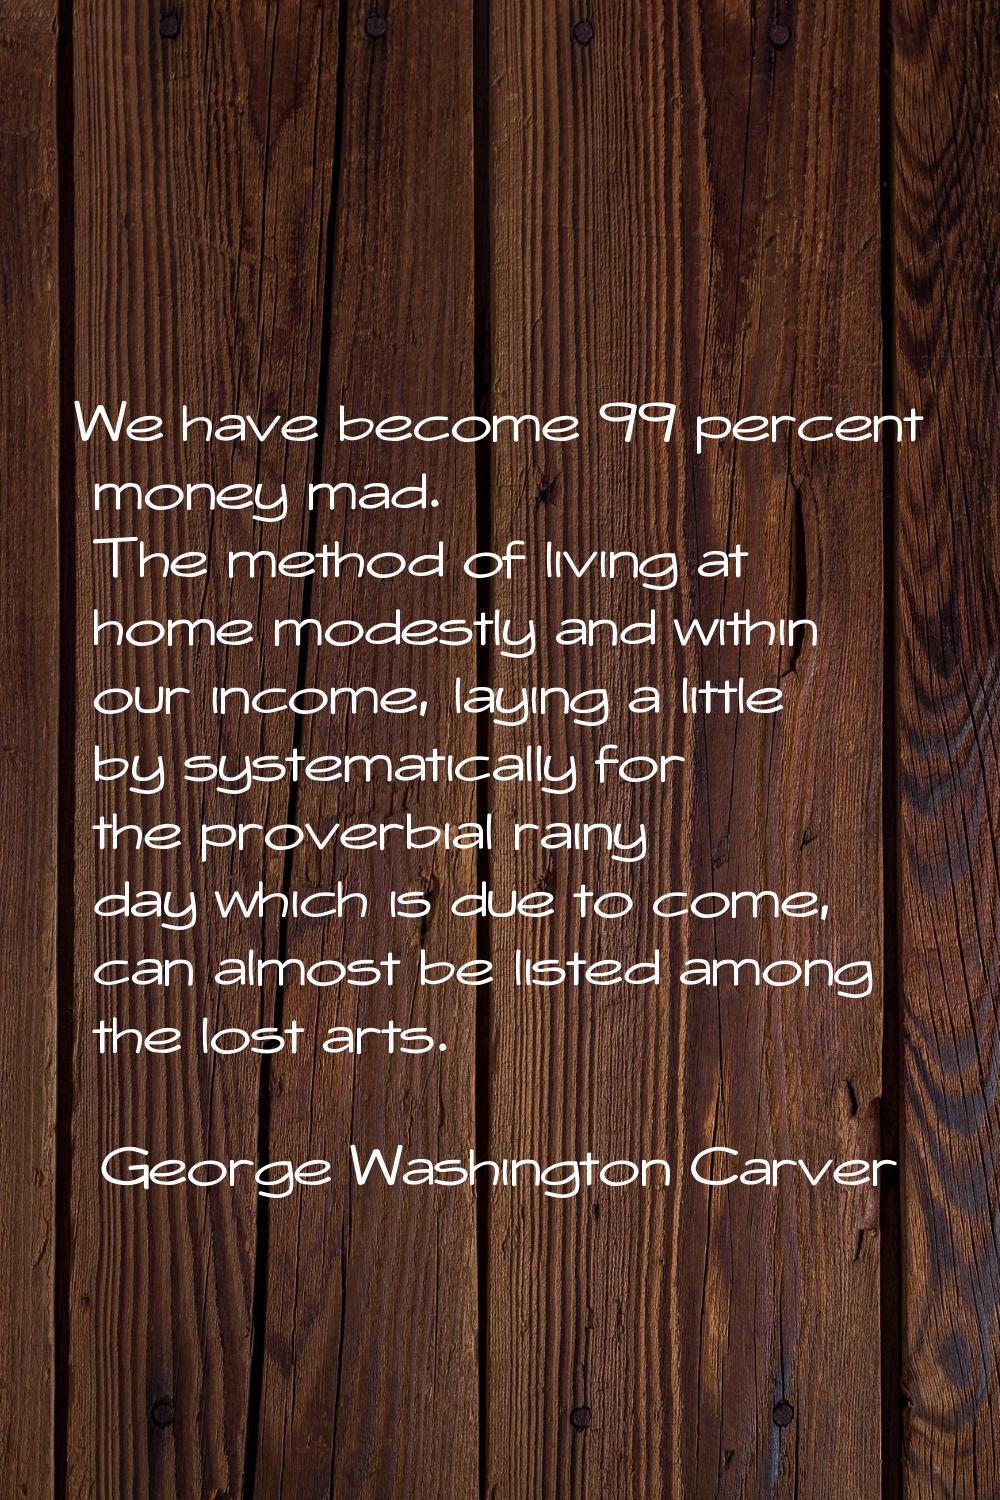 We have become 99 percent money mad. The method of living at home modestly and within our income, l